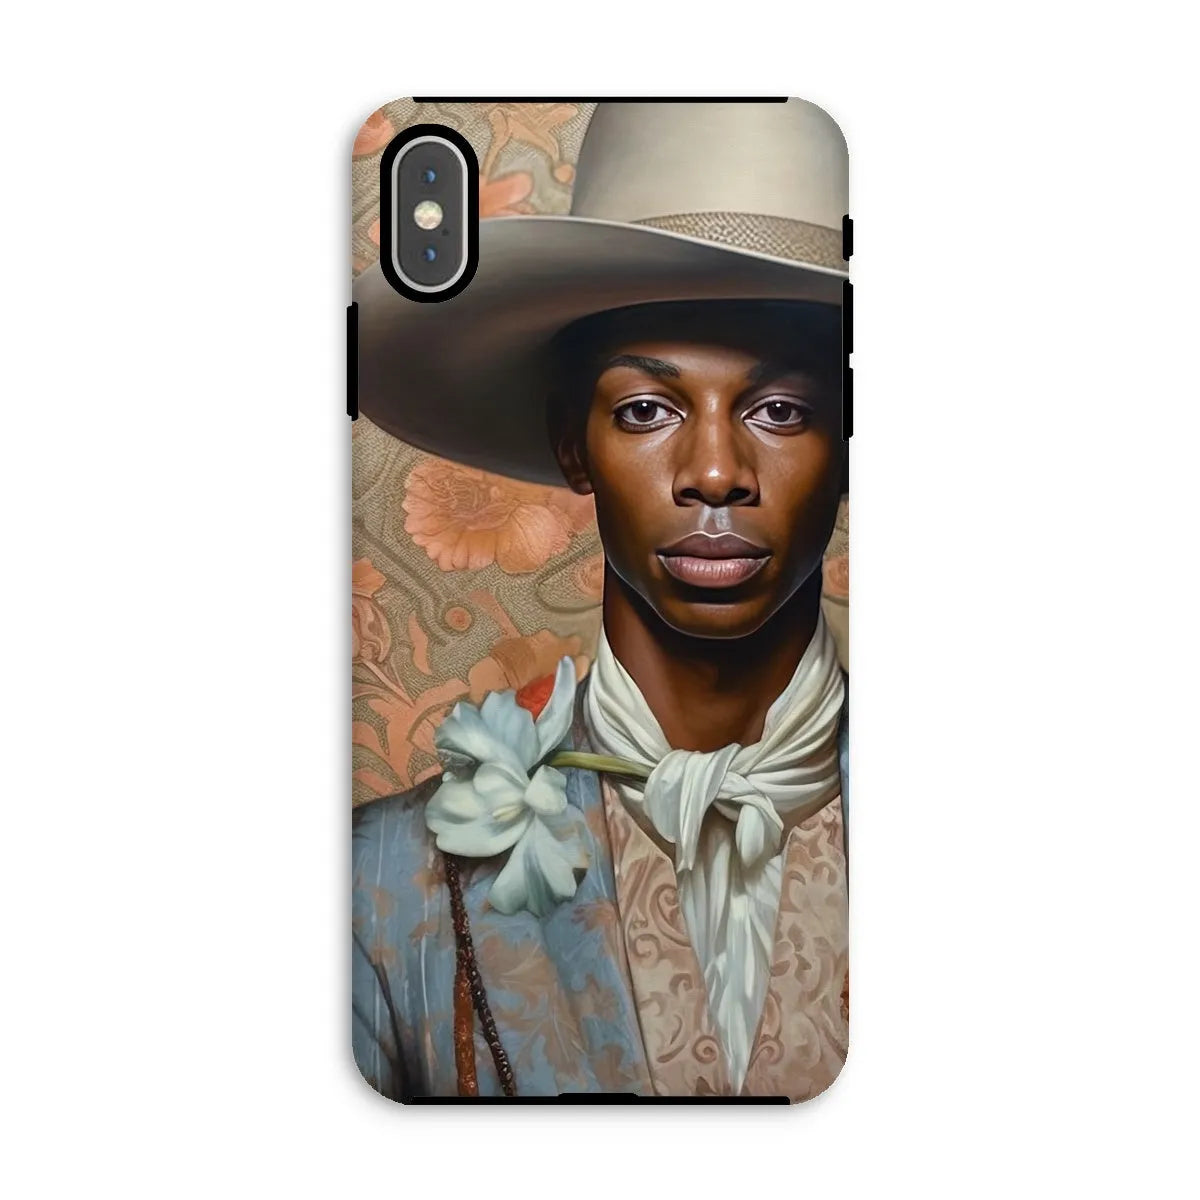 Apollo The Gay Cowboy - Gay Aesthetic Art Phone Case - Iphone Xs Max / Matte - Mobile Phone Cases - Aesthetic Art